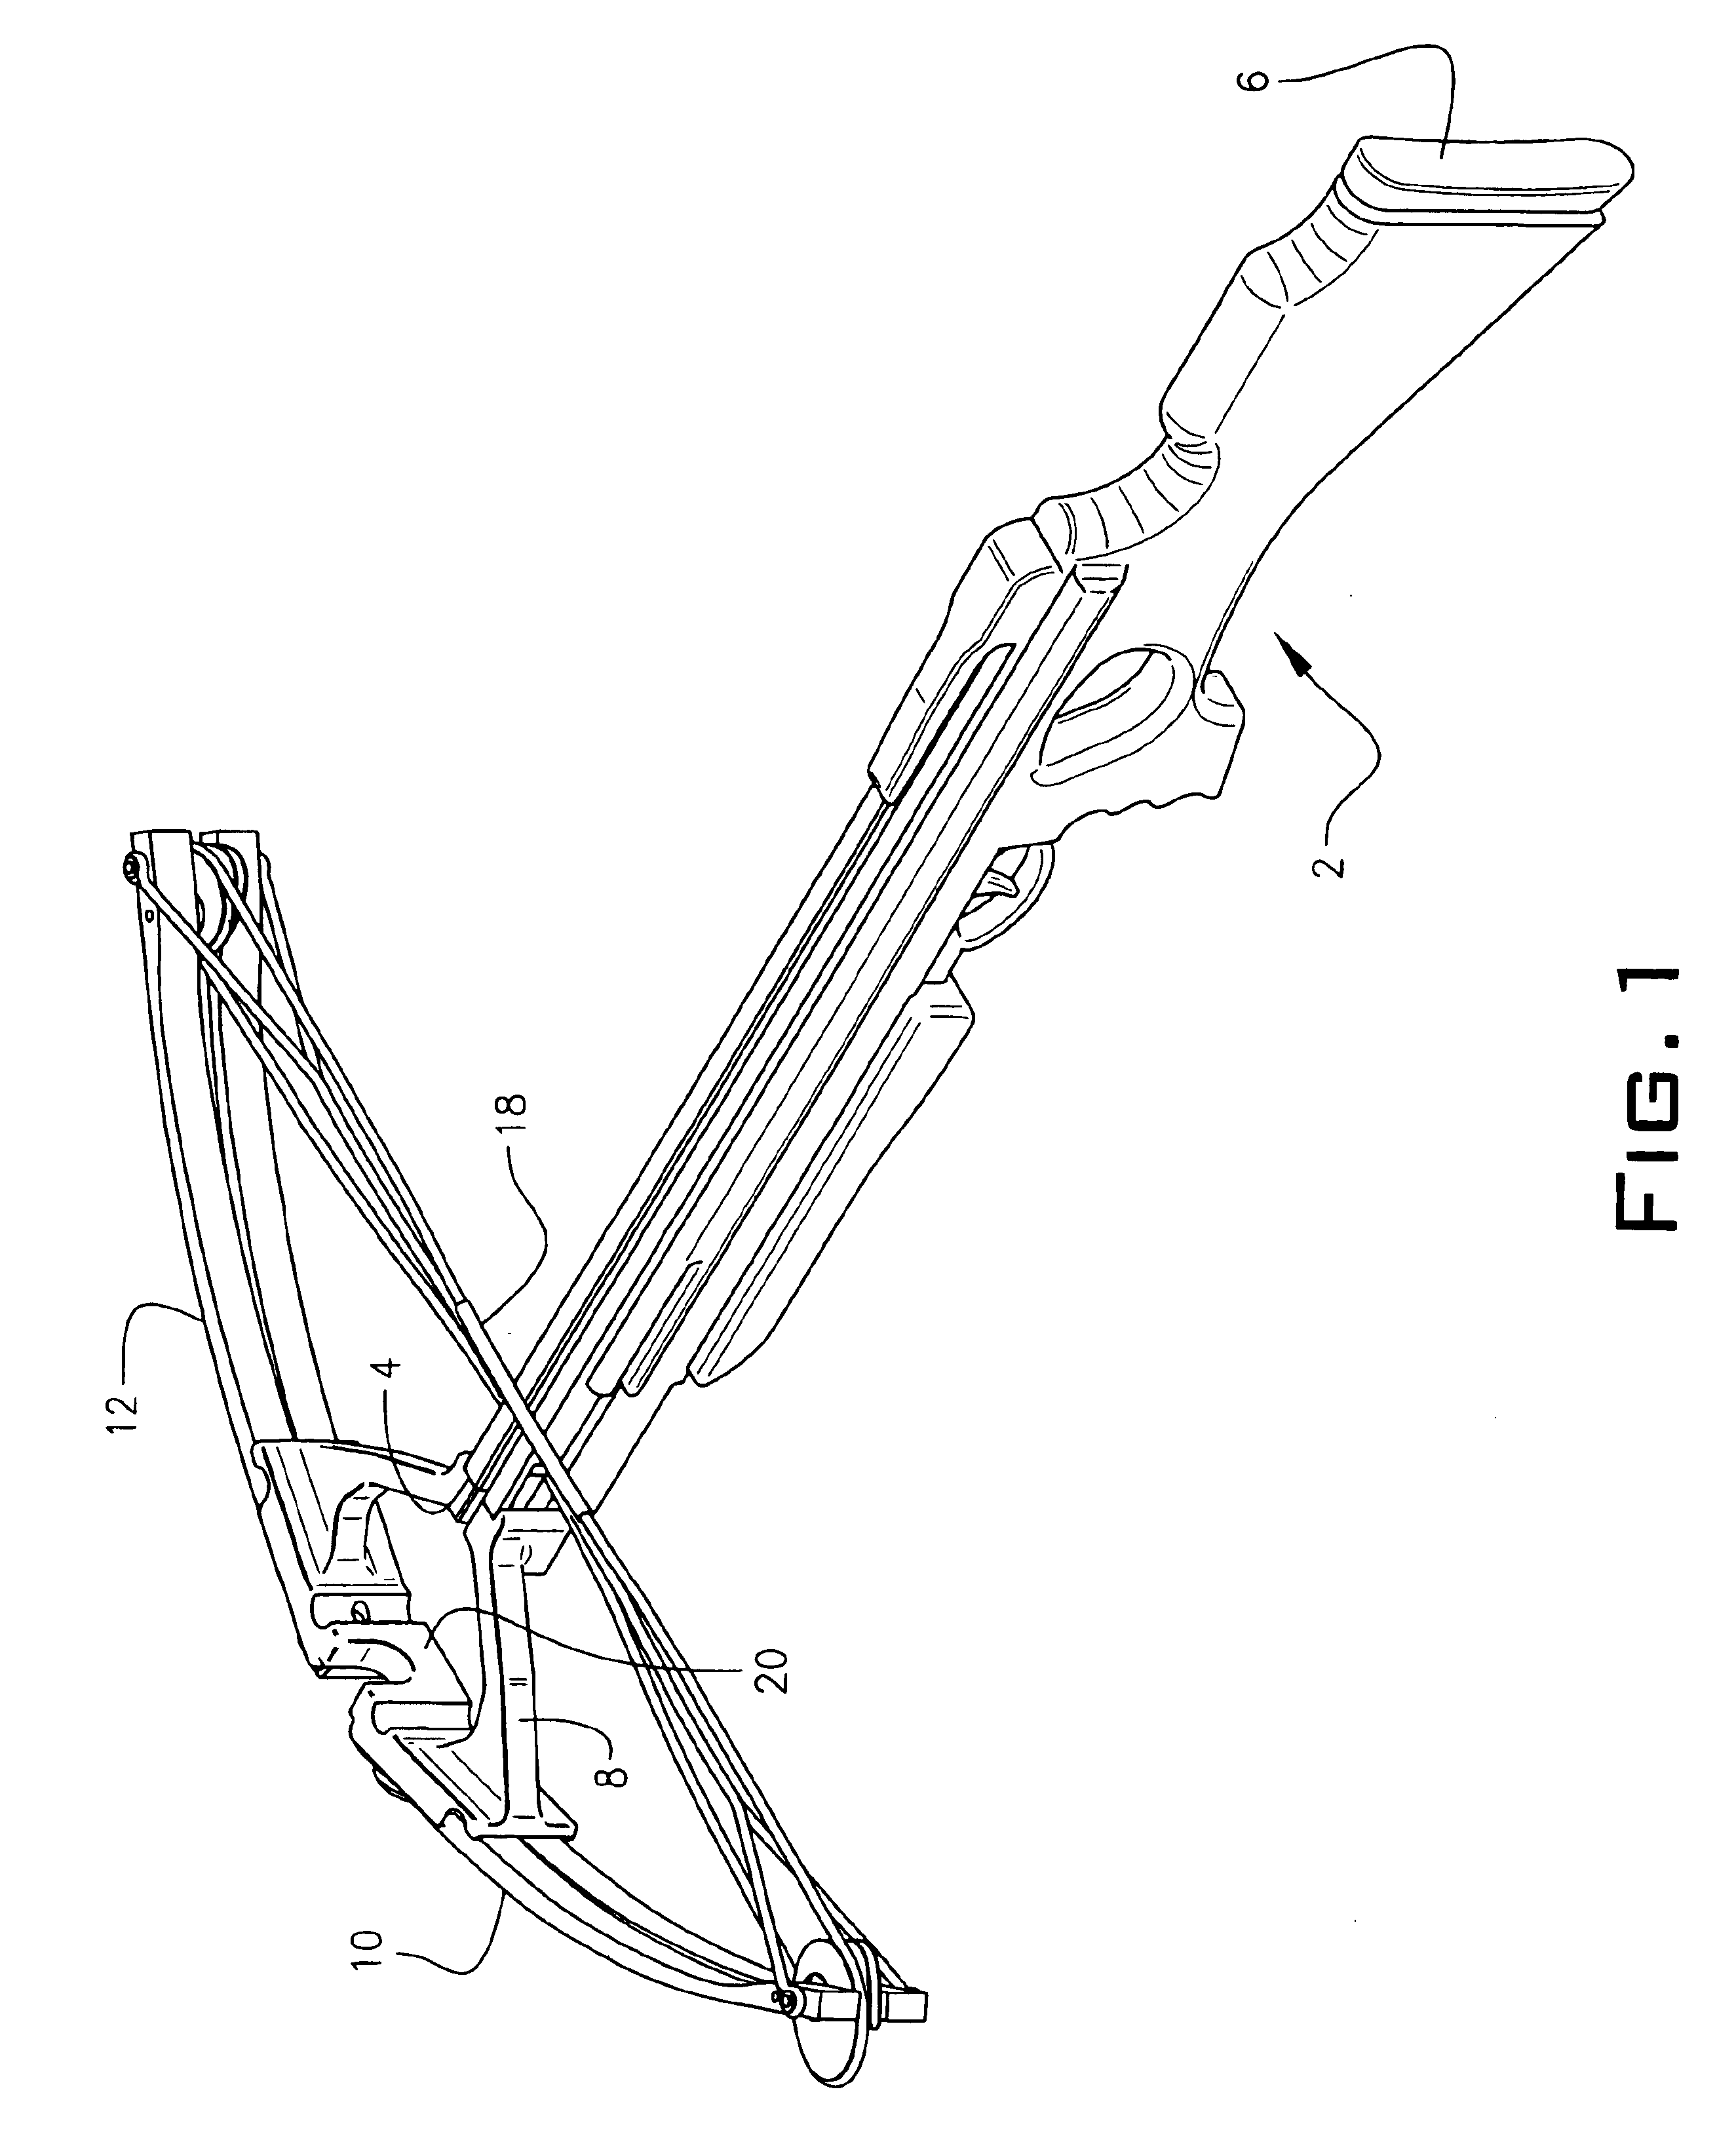 Crossbow with inset foot claw